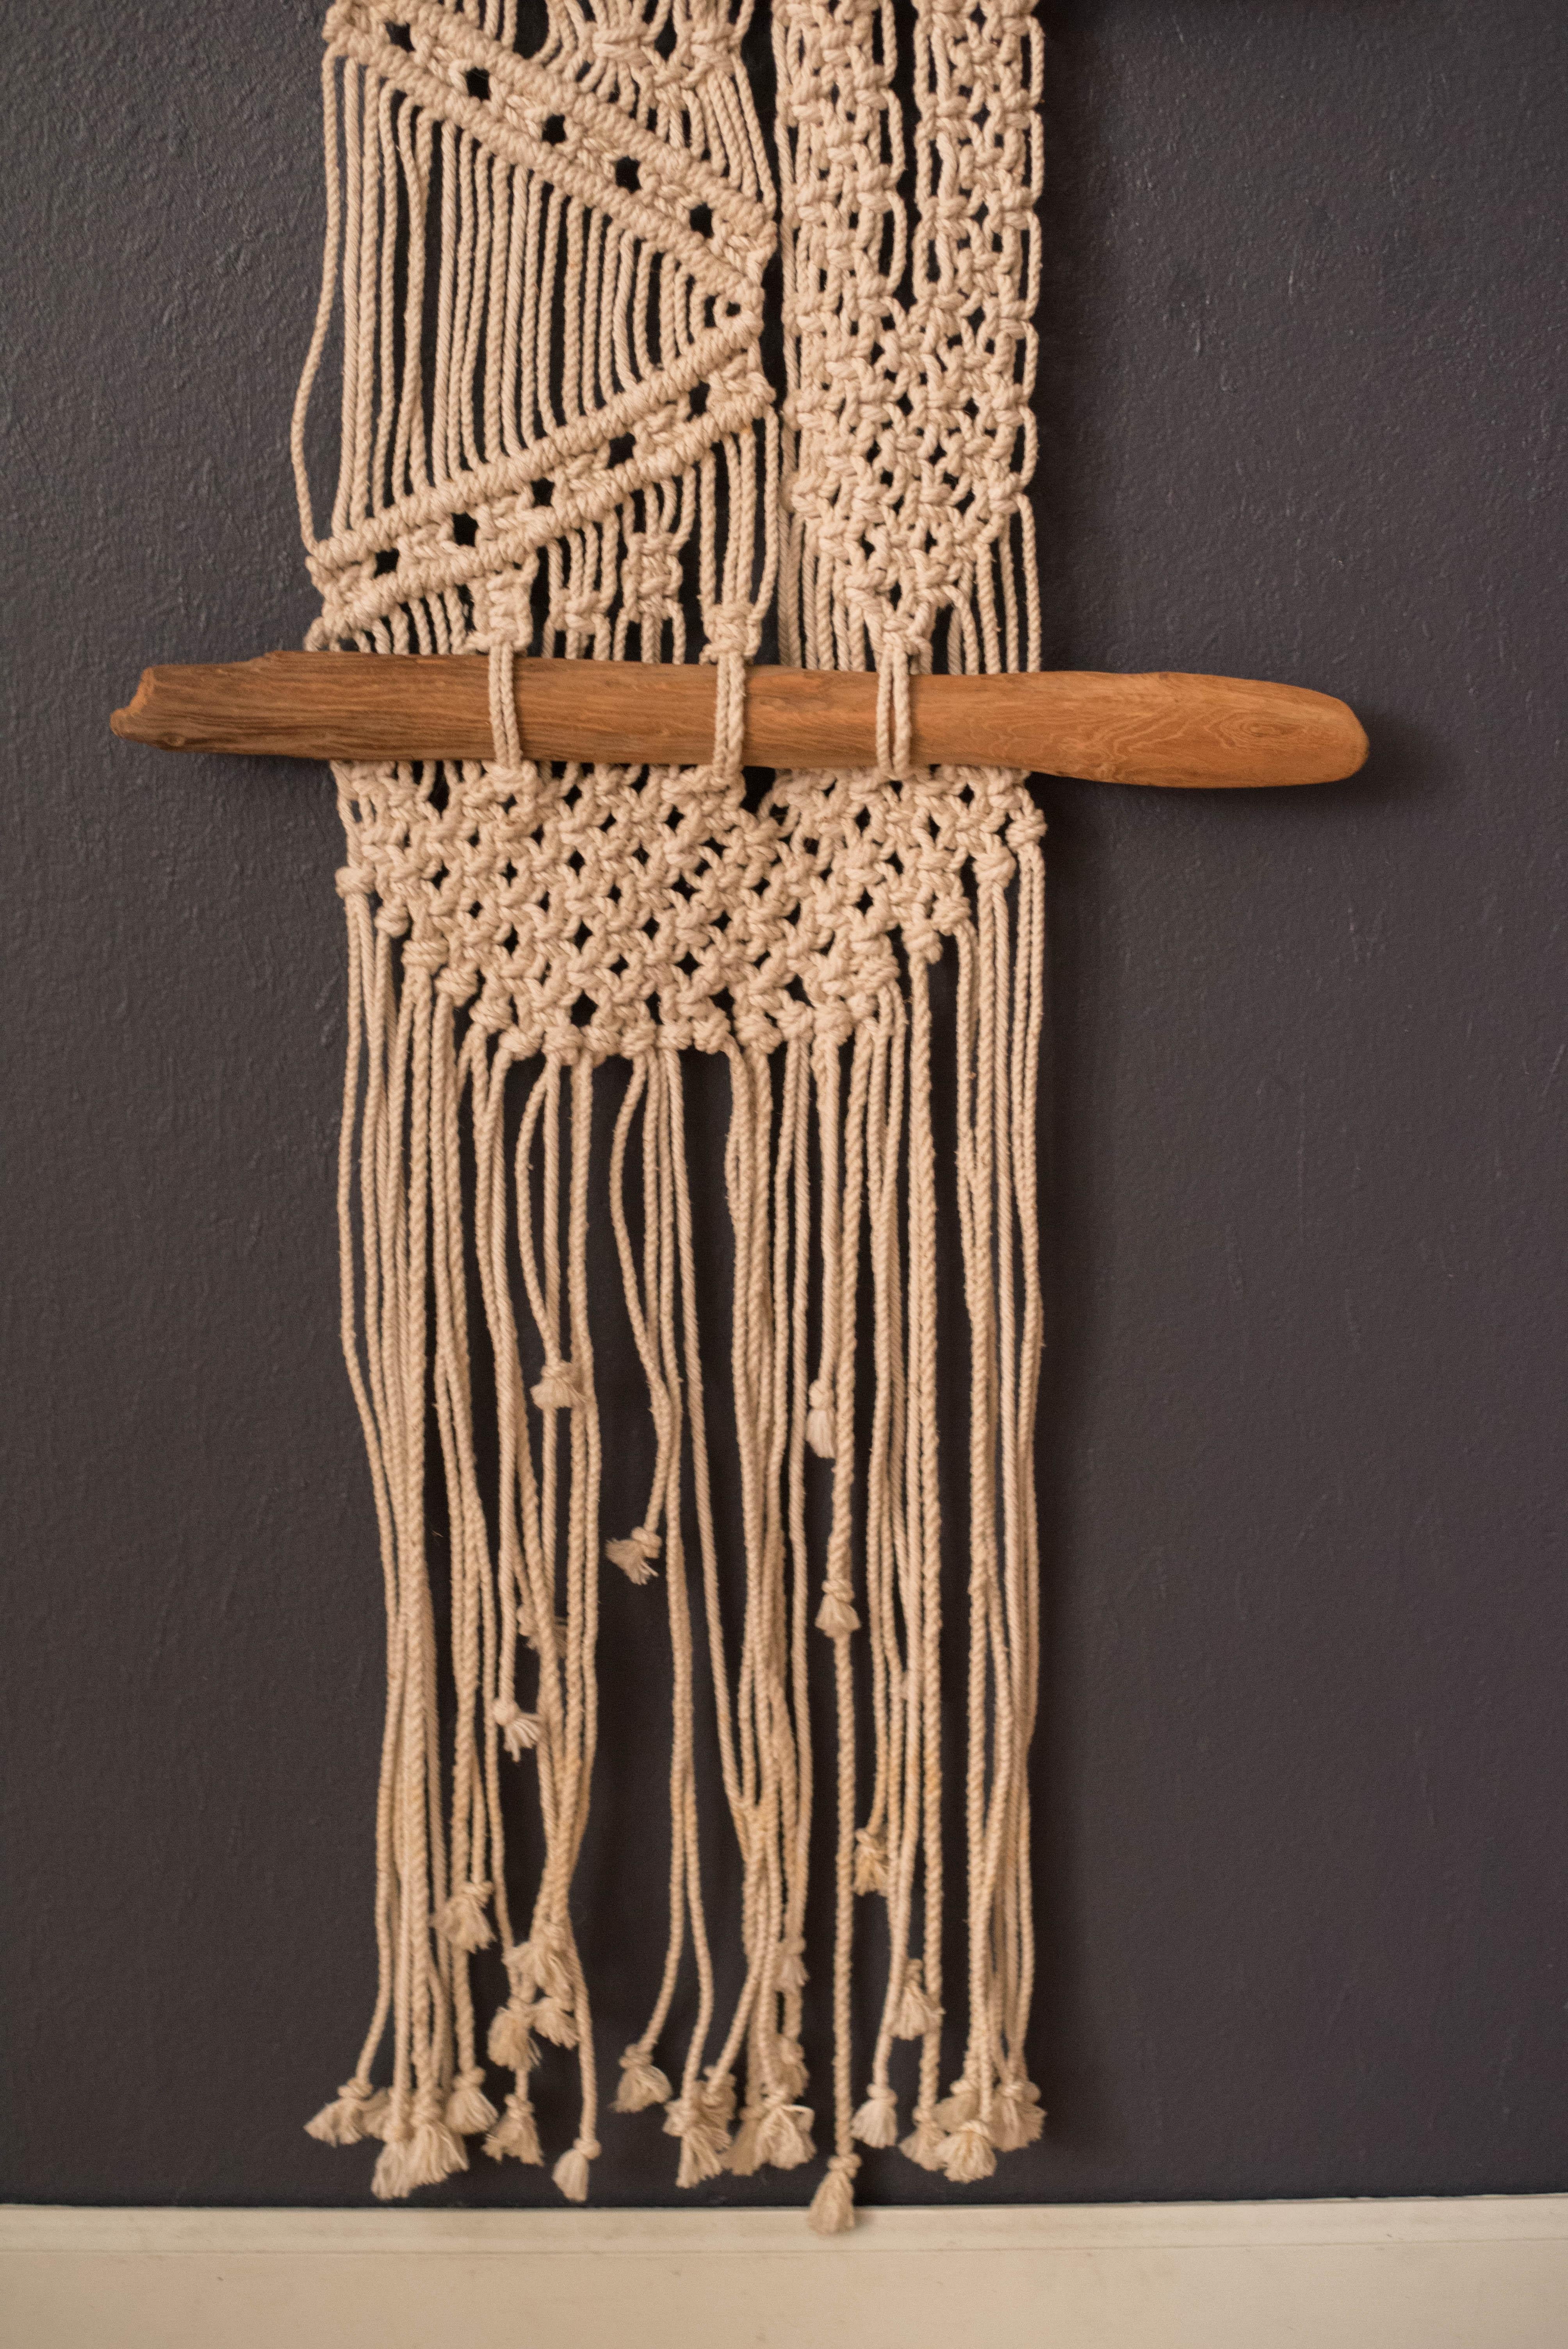 Late 20th Century Vintage Macramé Driftwood Fiber Art Wall Hanging Tapestry For Sale